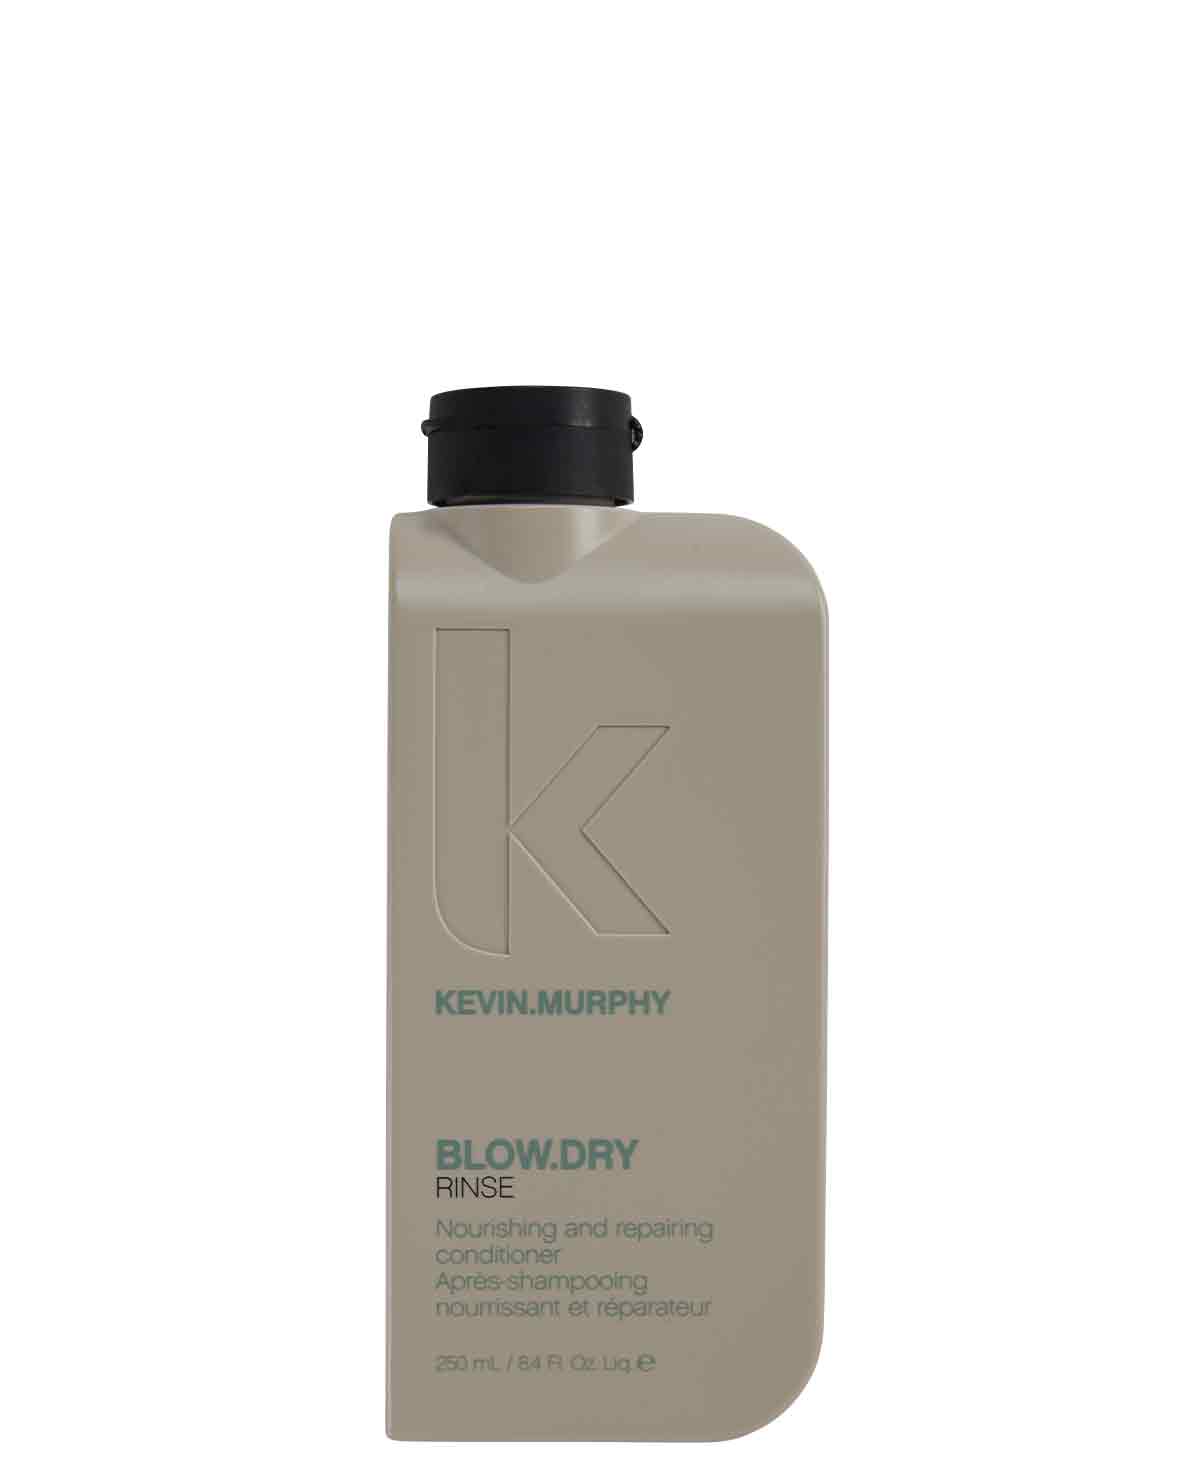 Kevin.Murphy BLOW.DRY.RINSE 250ml